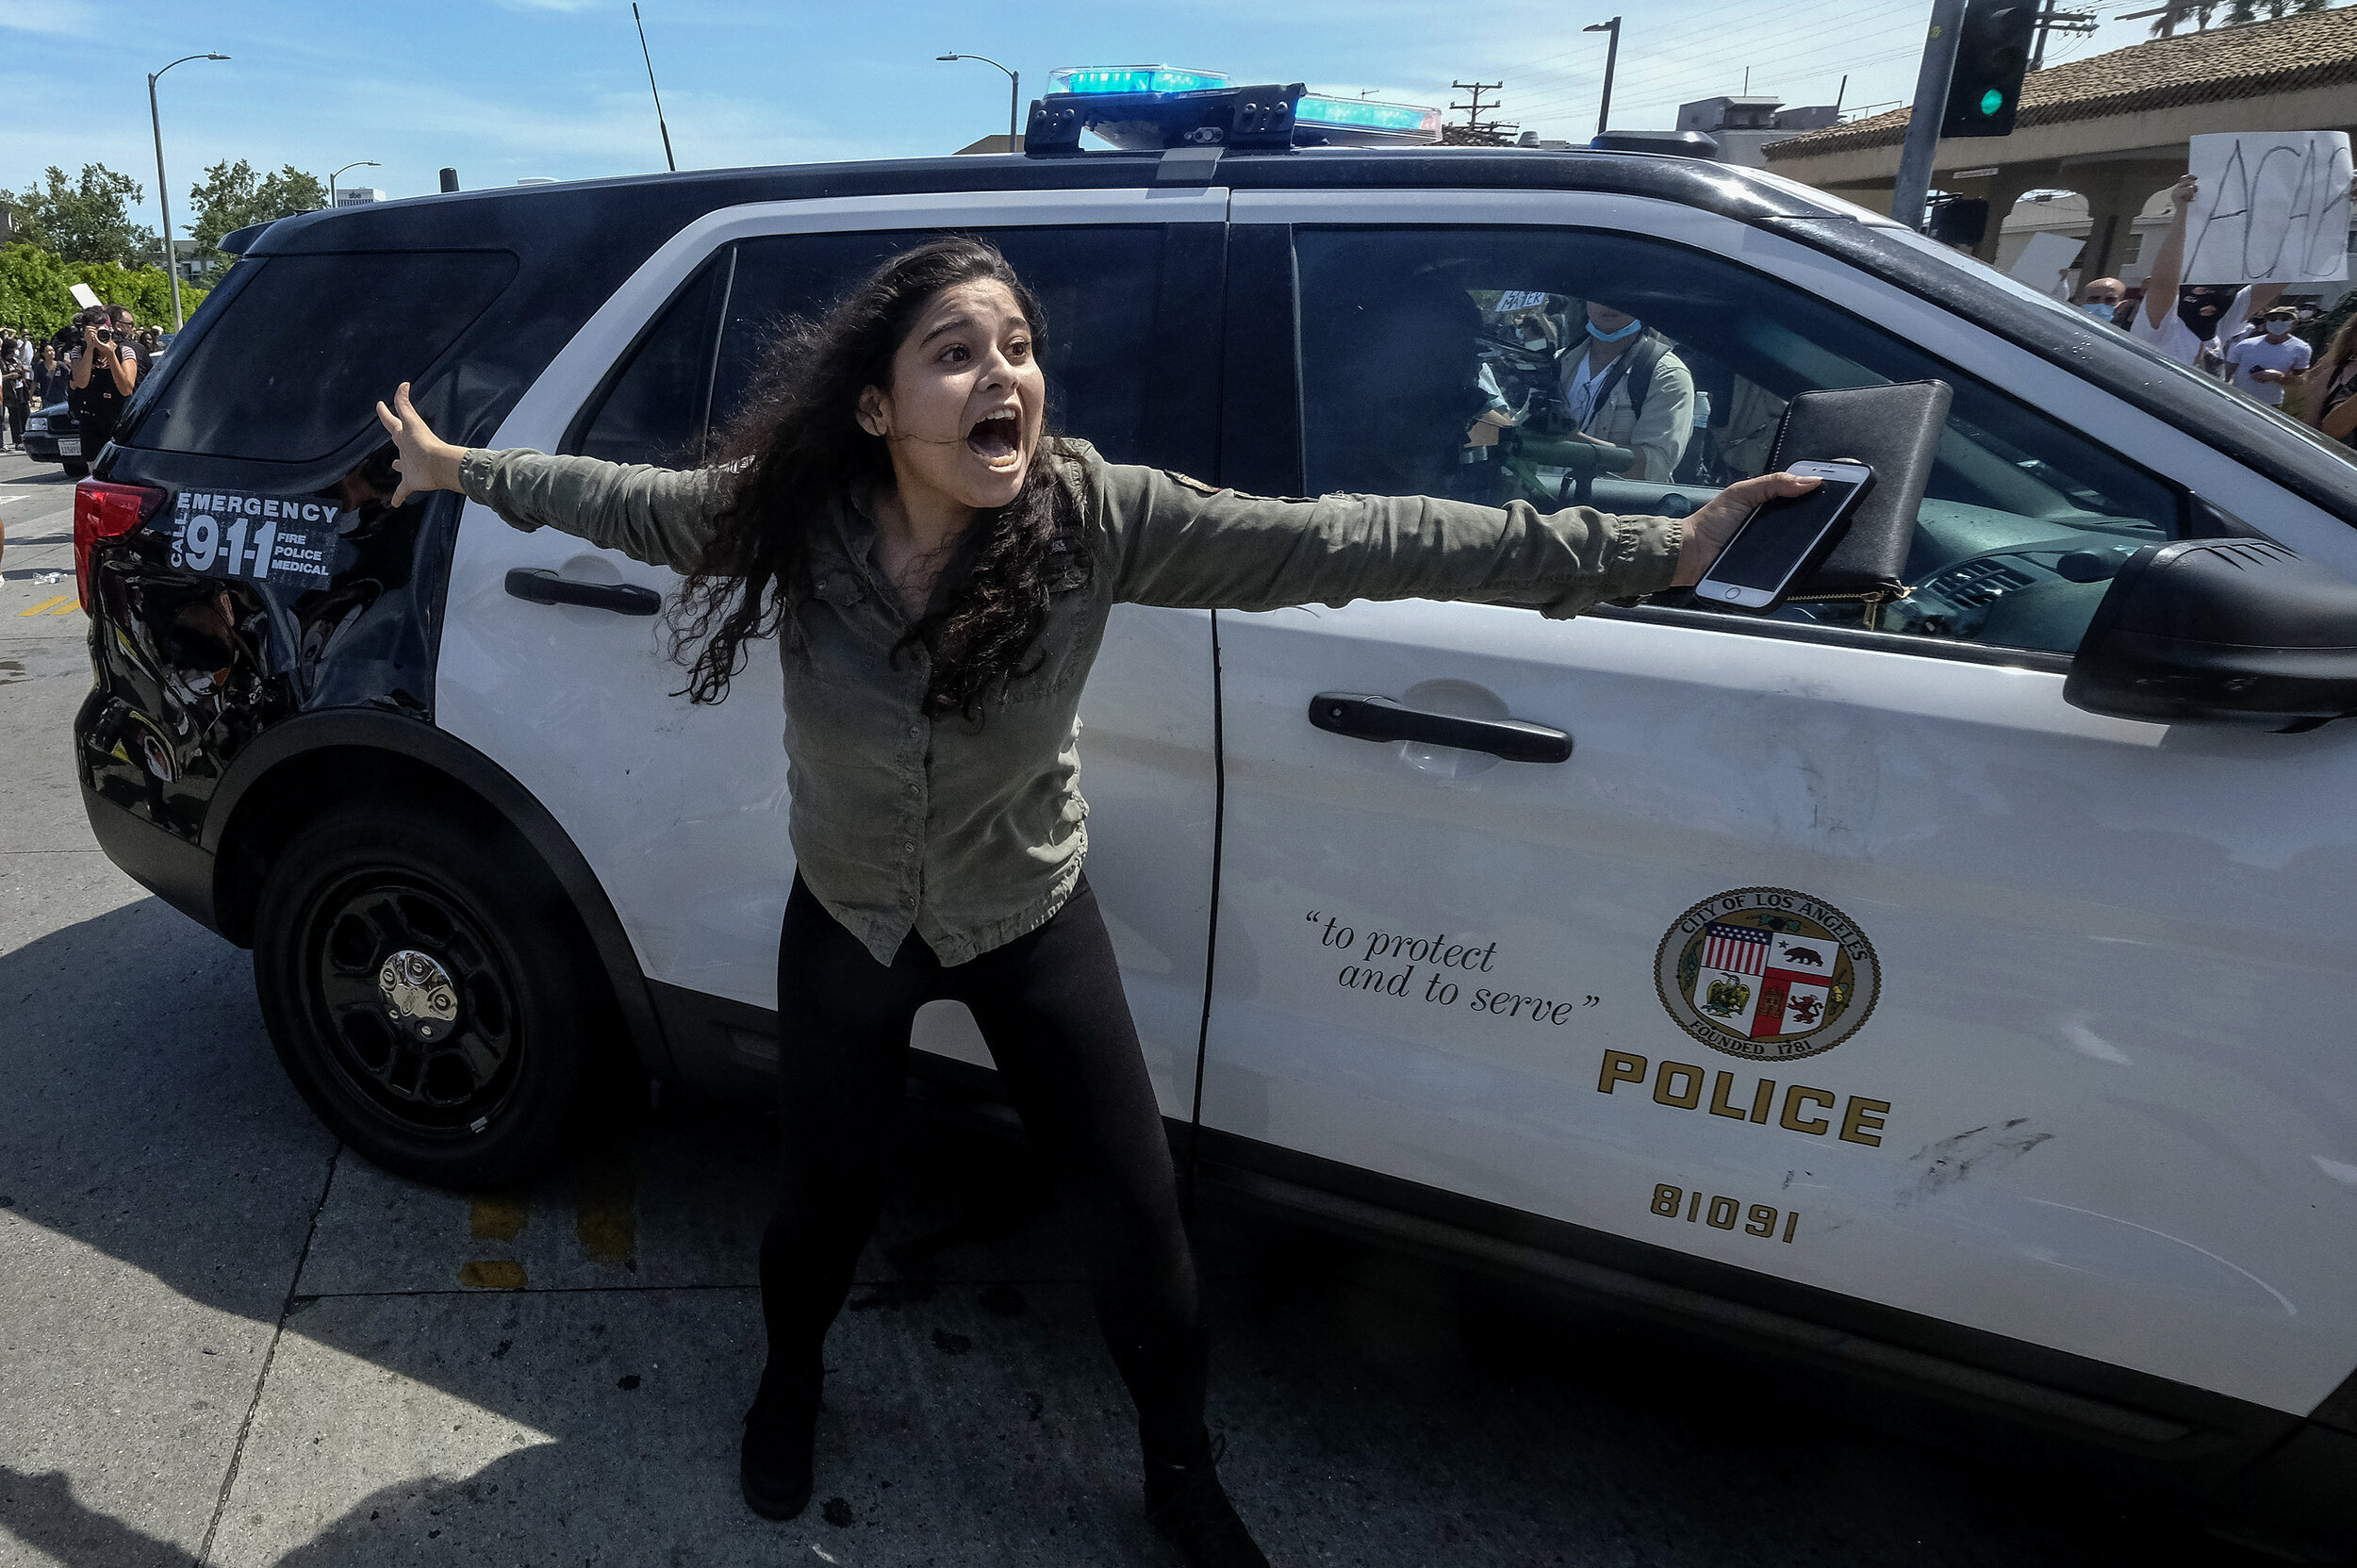  A protester tries to stop others from attacking a police vehicle during a protest over the death of George Floyd in Los Angeles, Saturday, May 30, 2020. Protests across the country have escalated over the death of George Floyd, a black man who was k